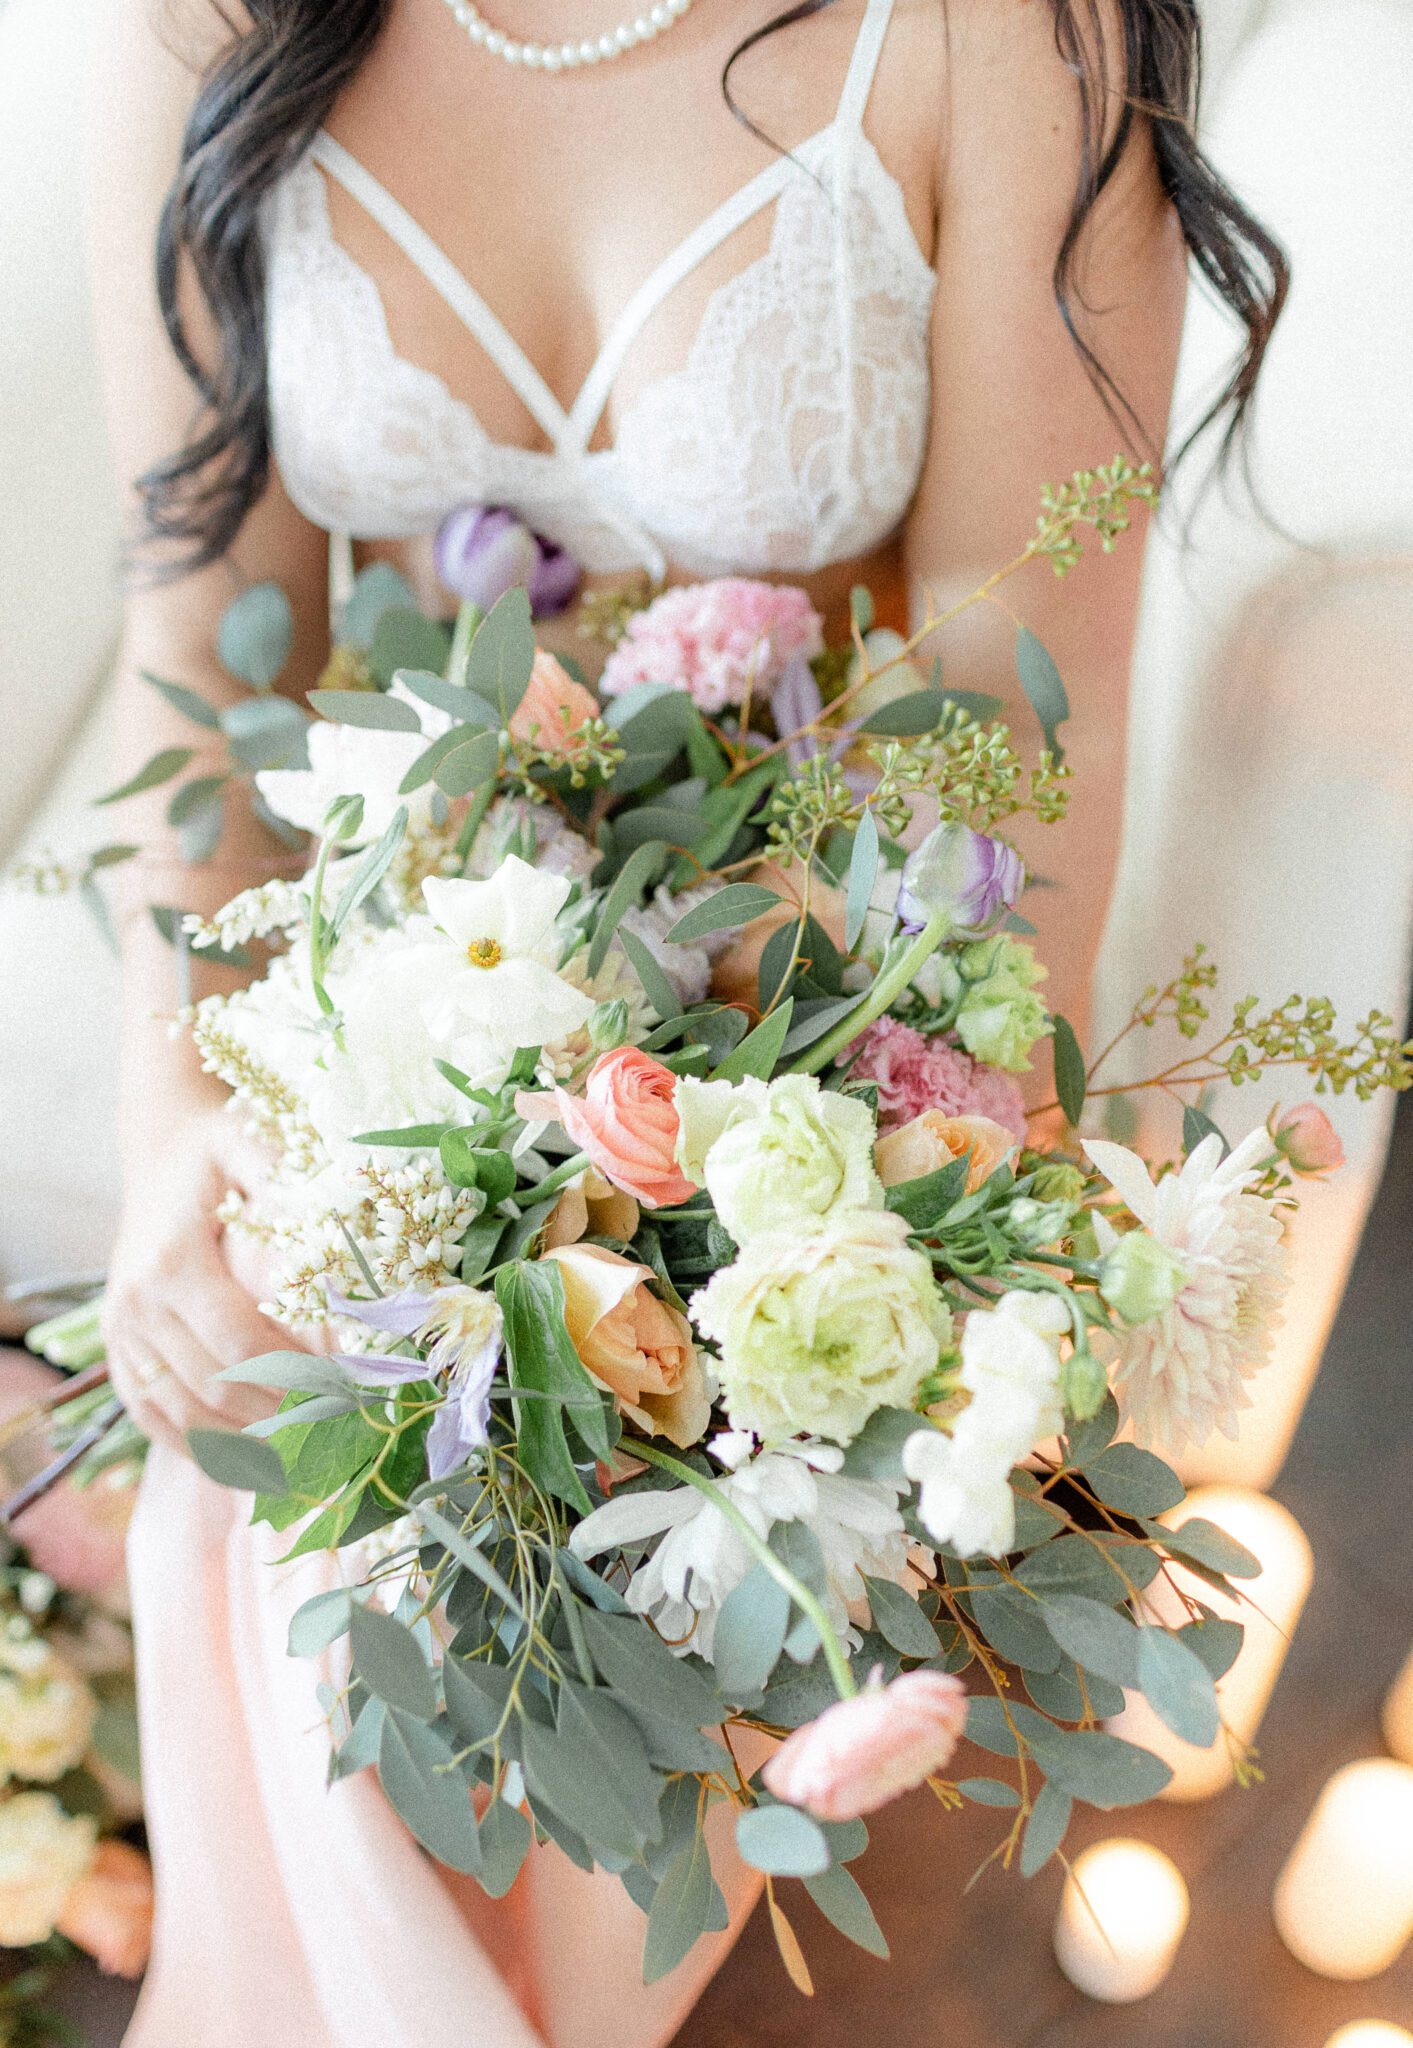 Feminine bridal boudoir, bride-to-be wearing romantic white lace lingerie and pearls holding spring inspired wedding florals 